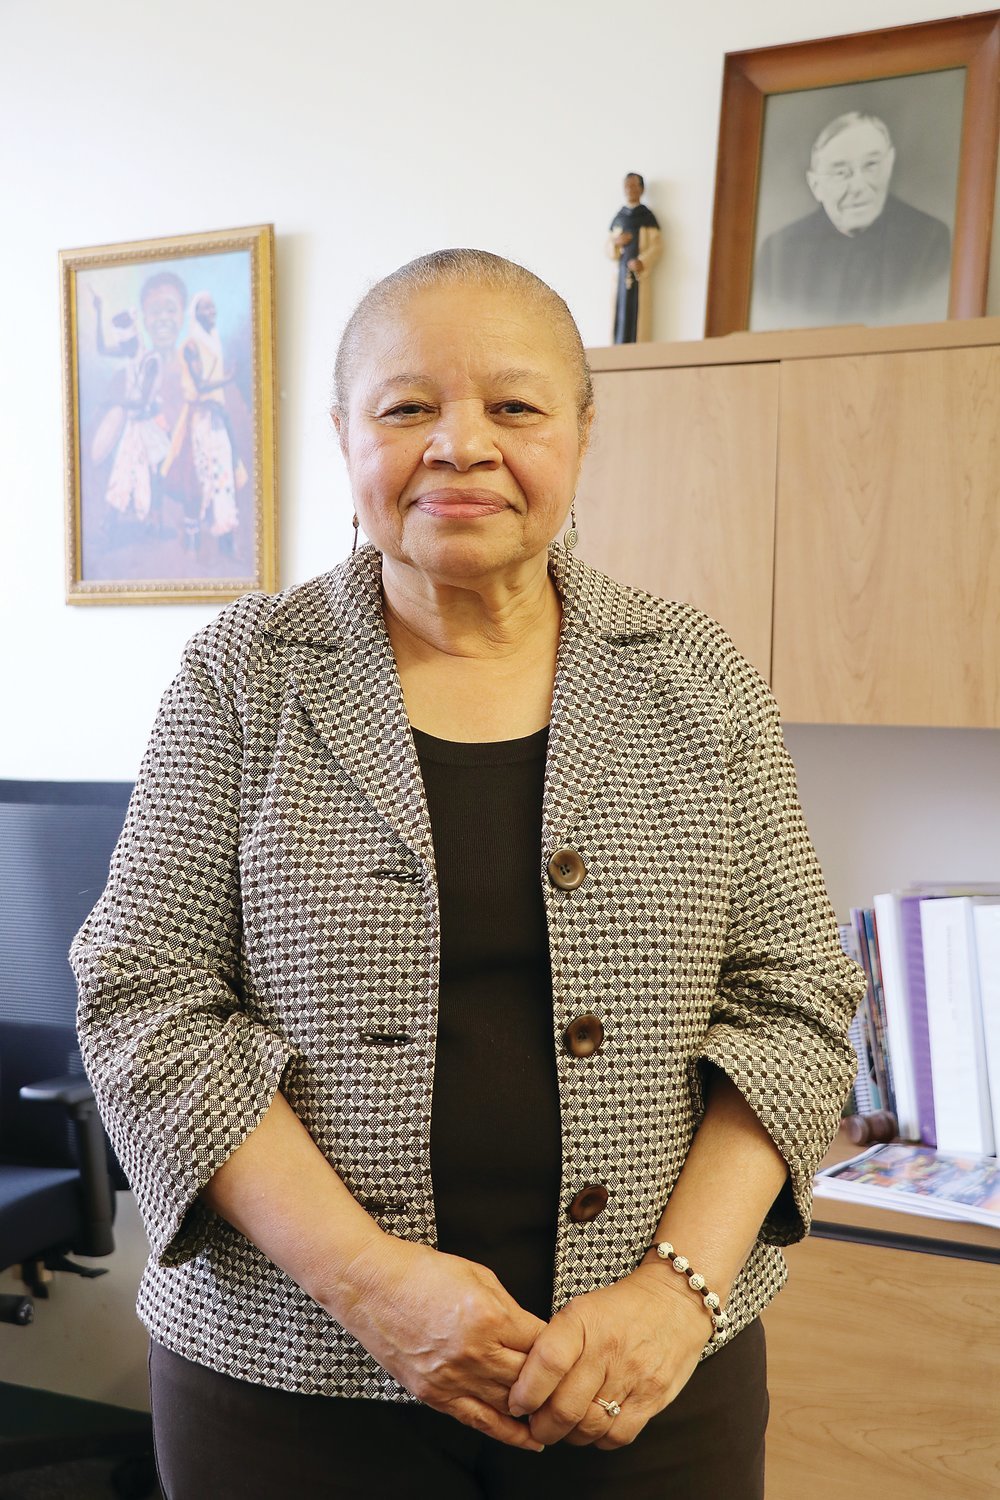 Bishop Thomas J. Tobin has appointed Linda A’Vant-Deishinni to serve as the coordinator of the diocesan Office of Black Catholic Ministry. A’Vant-Deishinni will fulfill her new role, replacing Patty January who retired earlier this year, while continuing to serve as the director of the diocesan St. Martin de Porres Center. One of her goals as coordinator will be to inspire Black Catholics to take more active roles in their parishes and communities and to share their rich heritage.